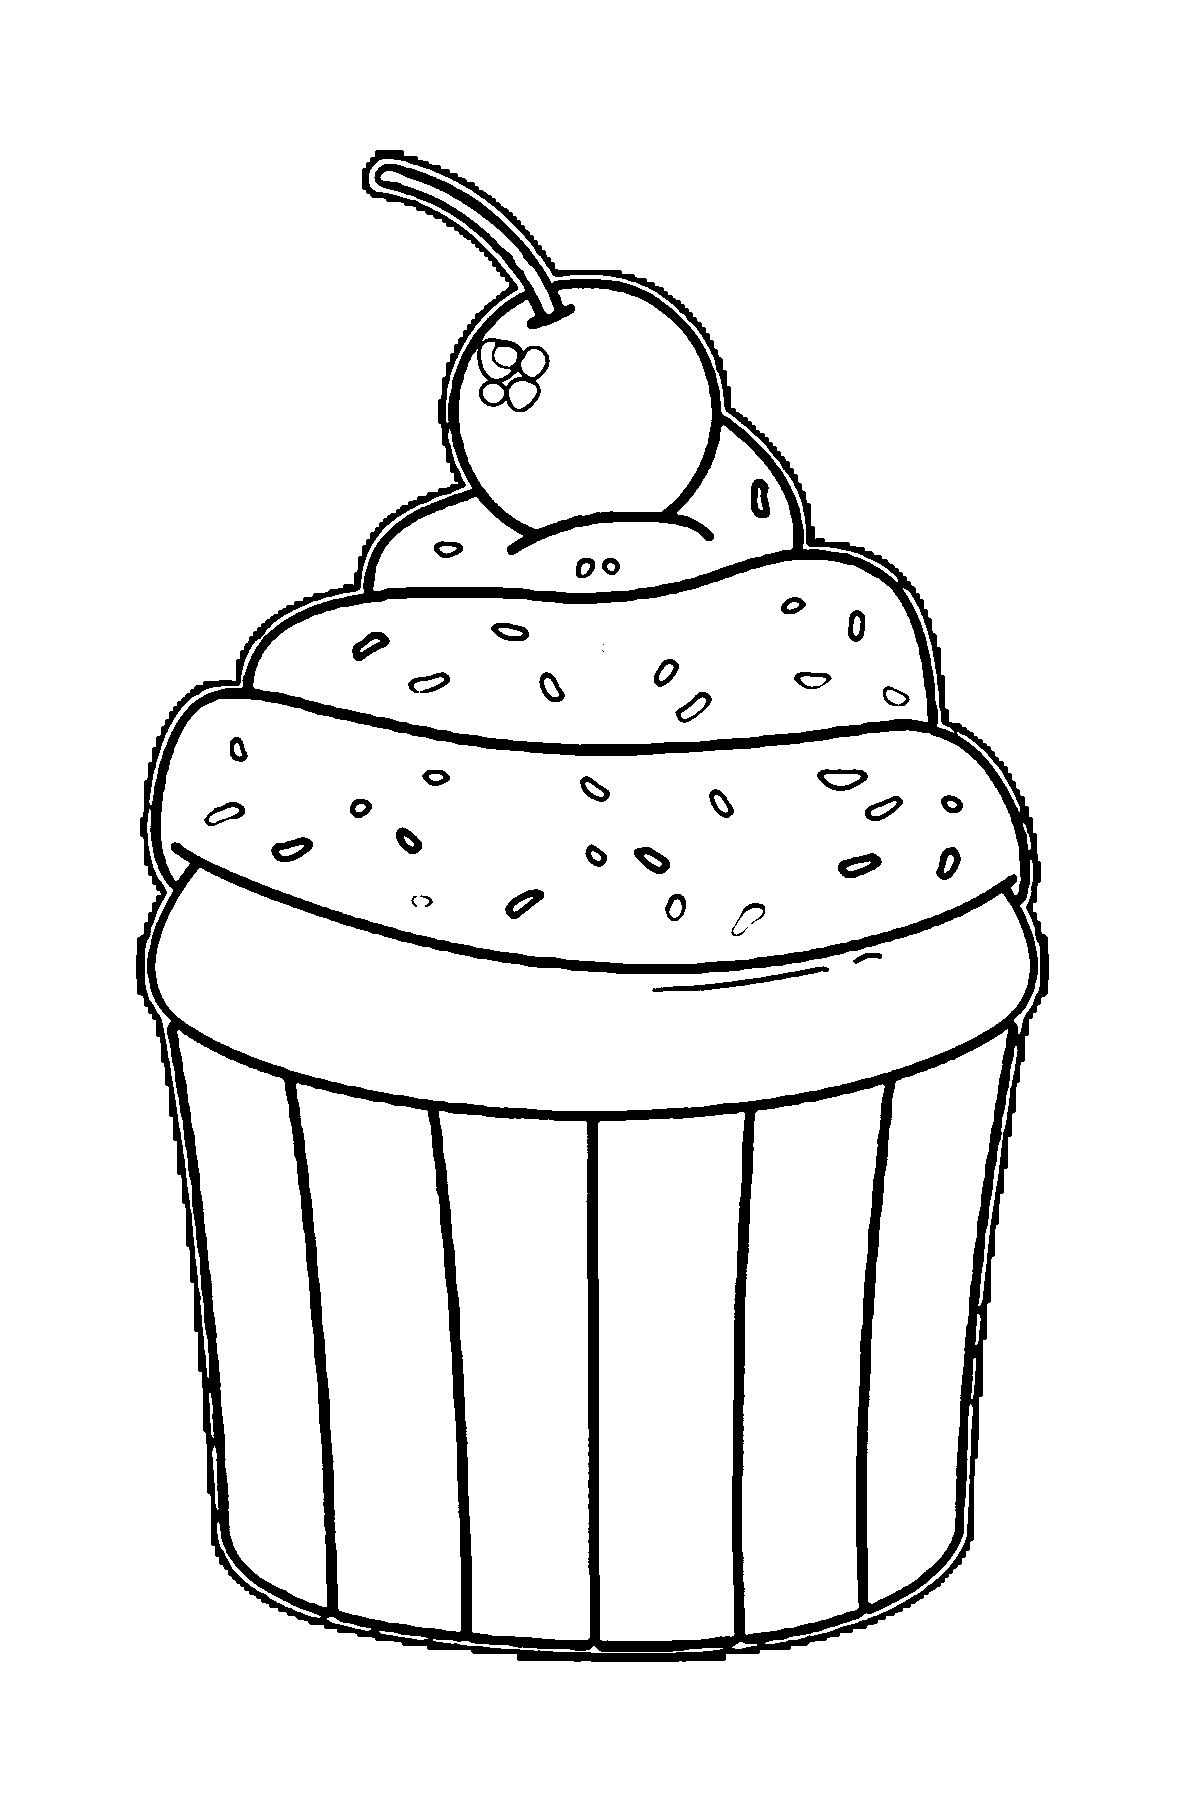 cup cake coloring pages